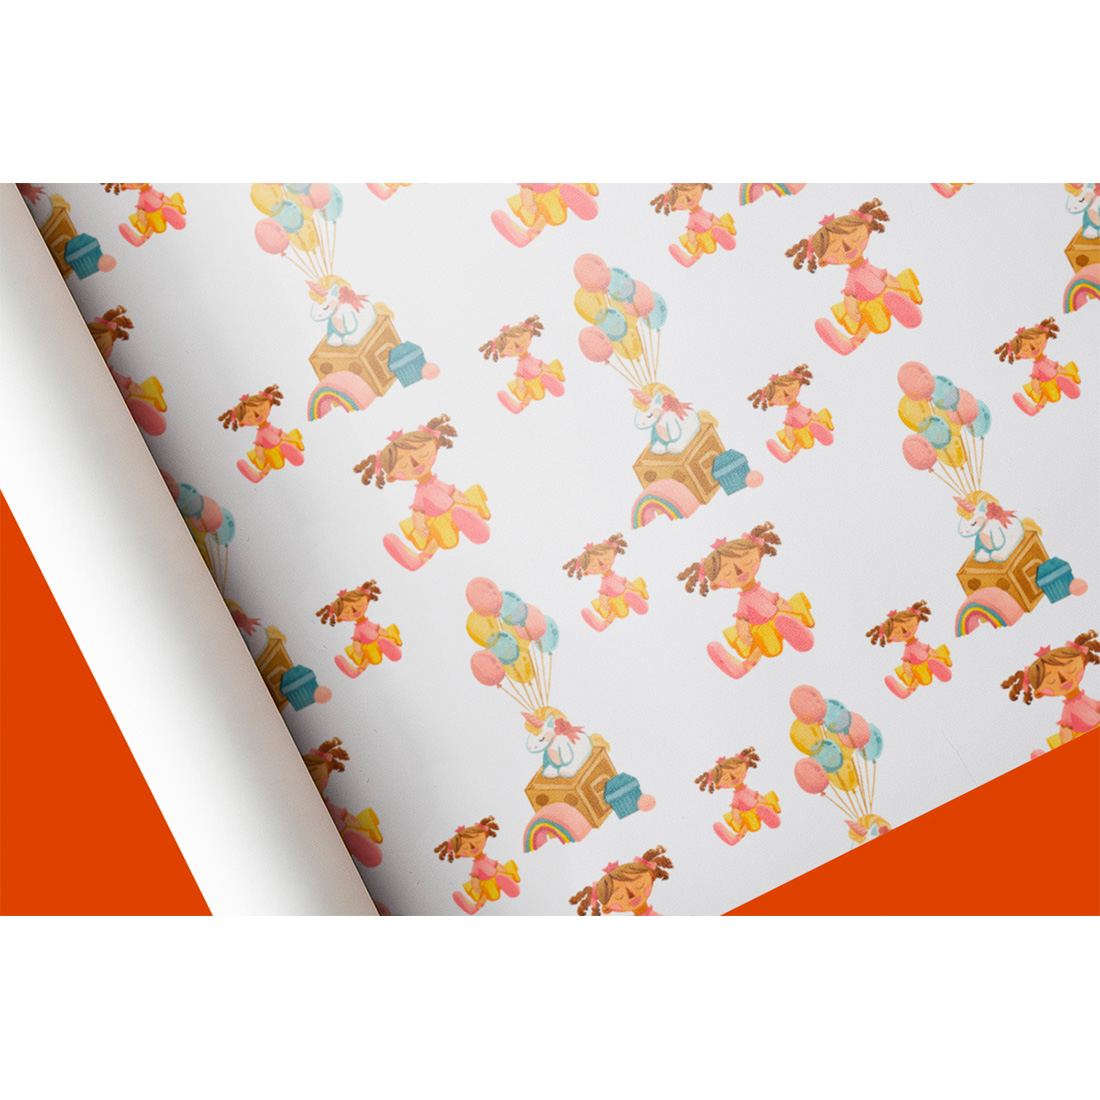 Image of wrapping paper with colorful unicorn patterns